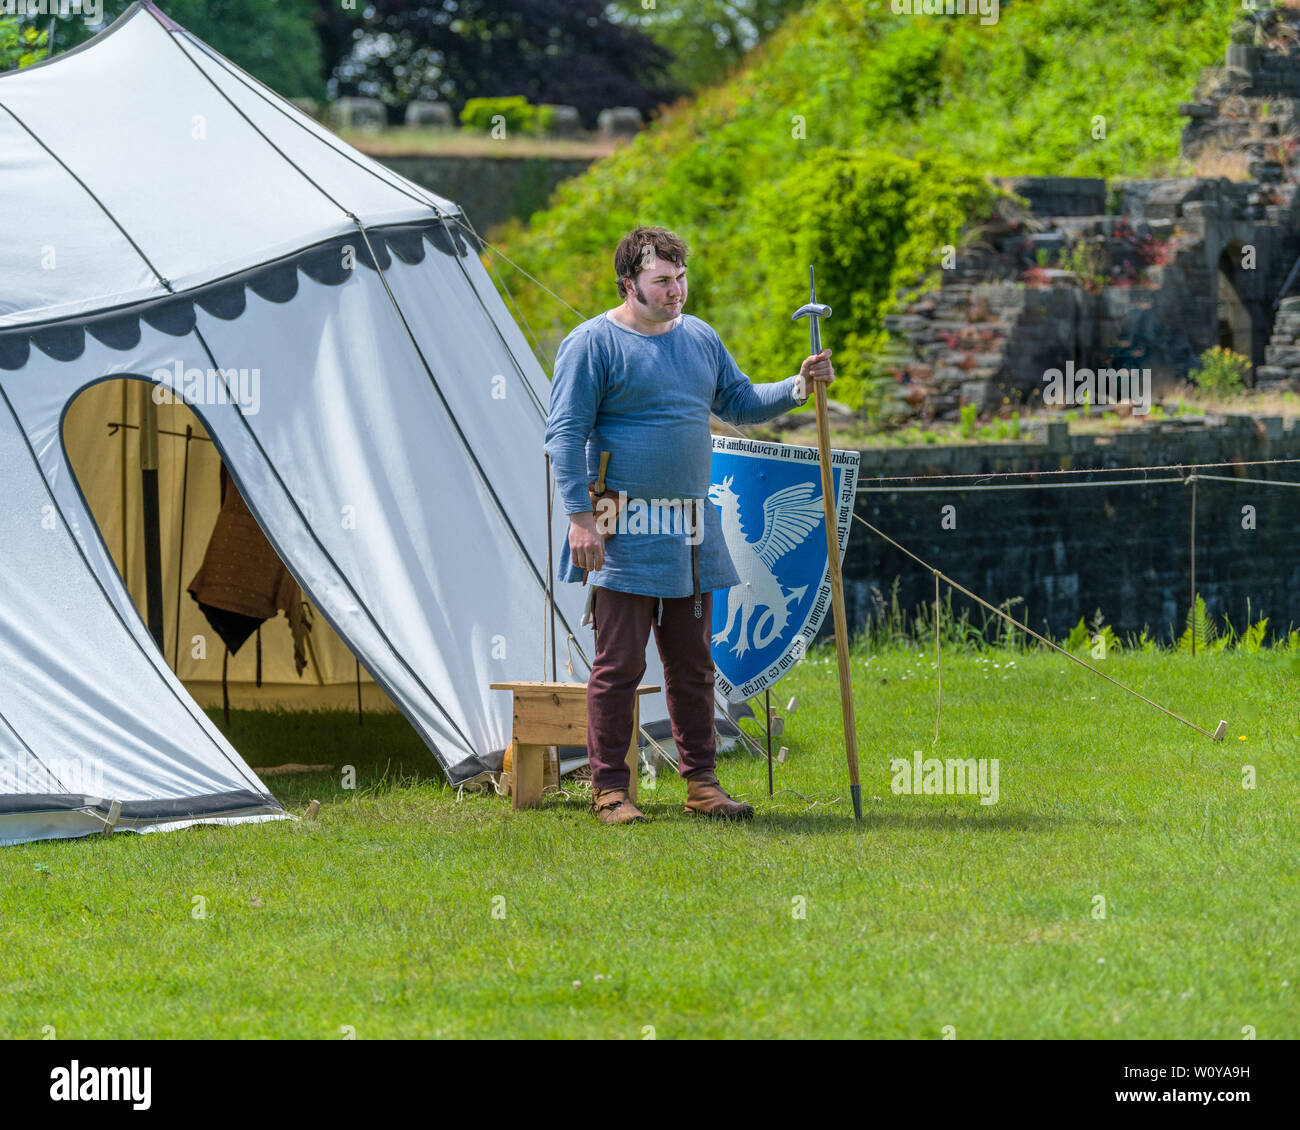 Medieval armorer stands by his shield. The encampment at Cardiff Joust 2019. Stock Photo